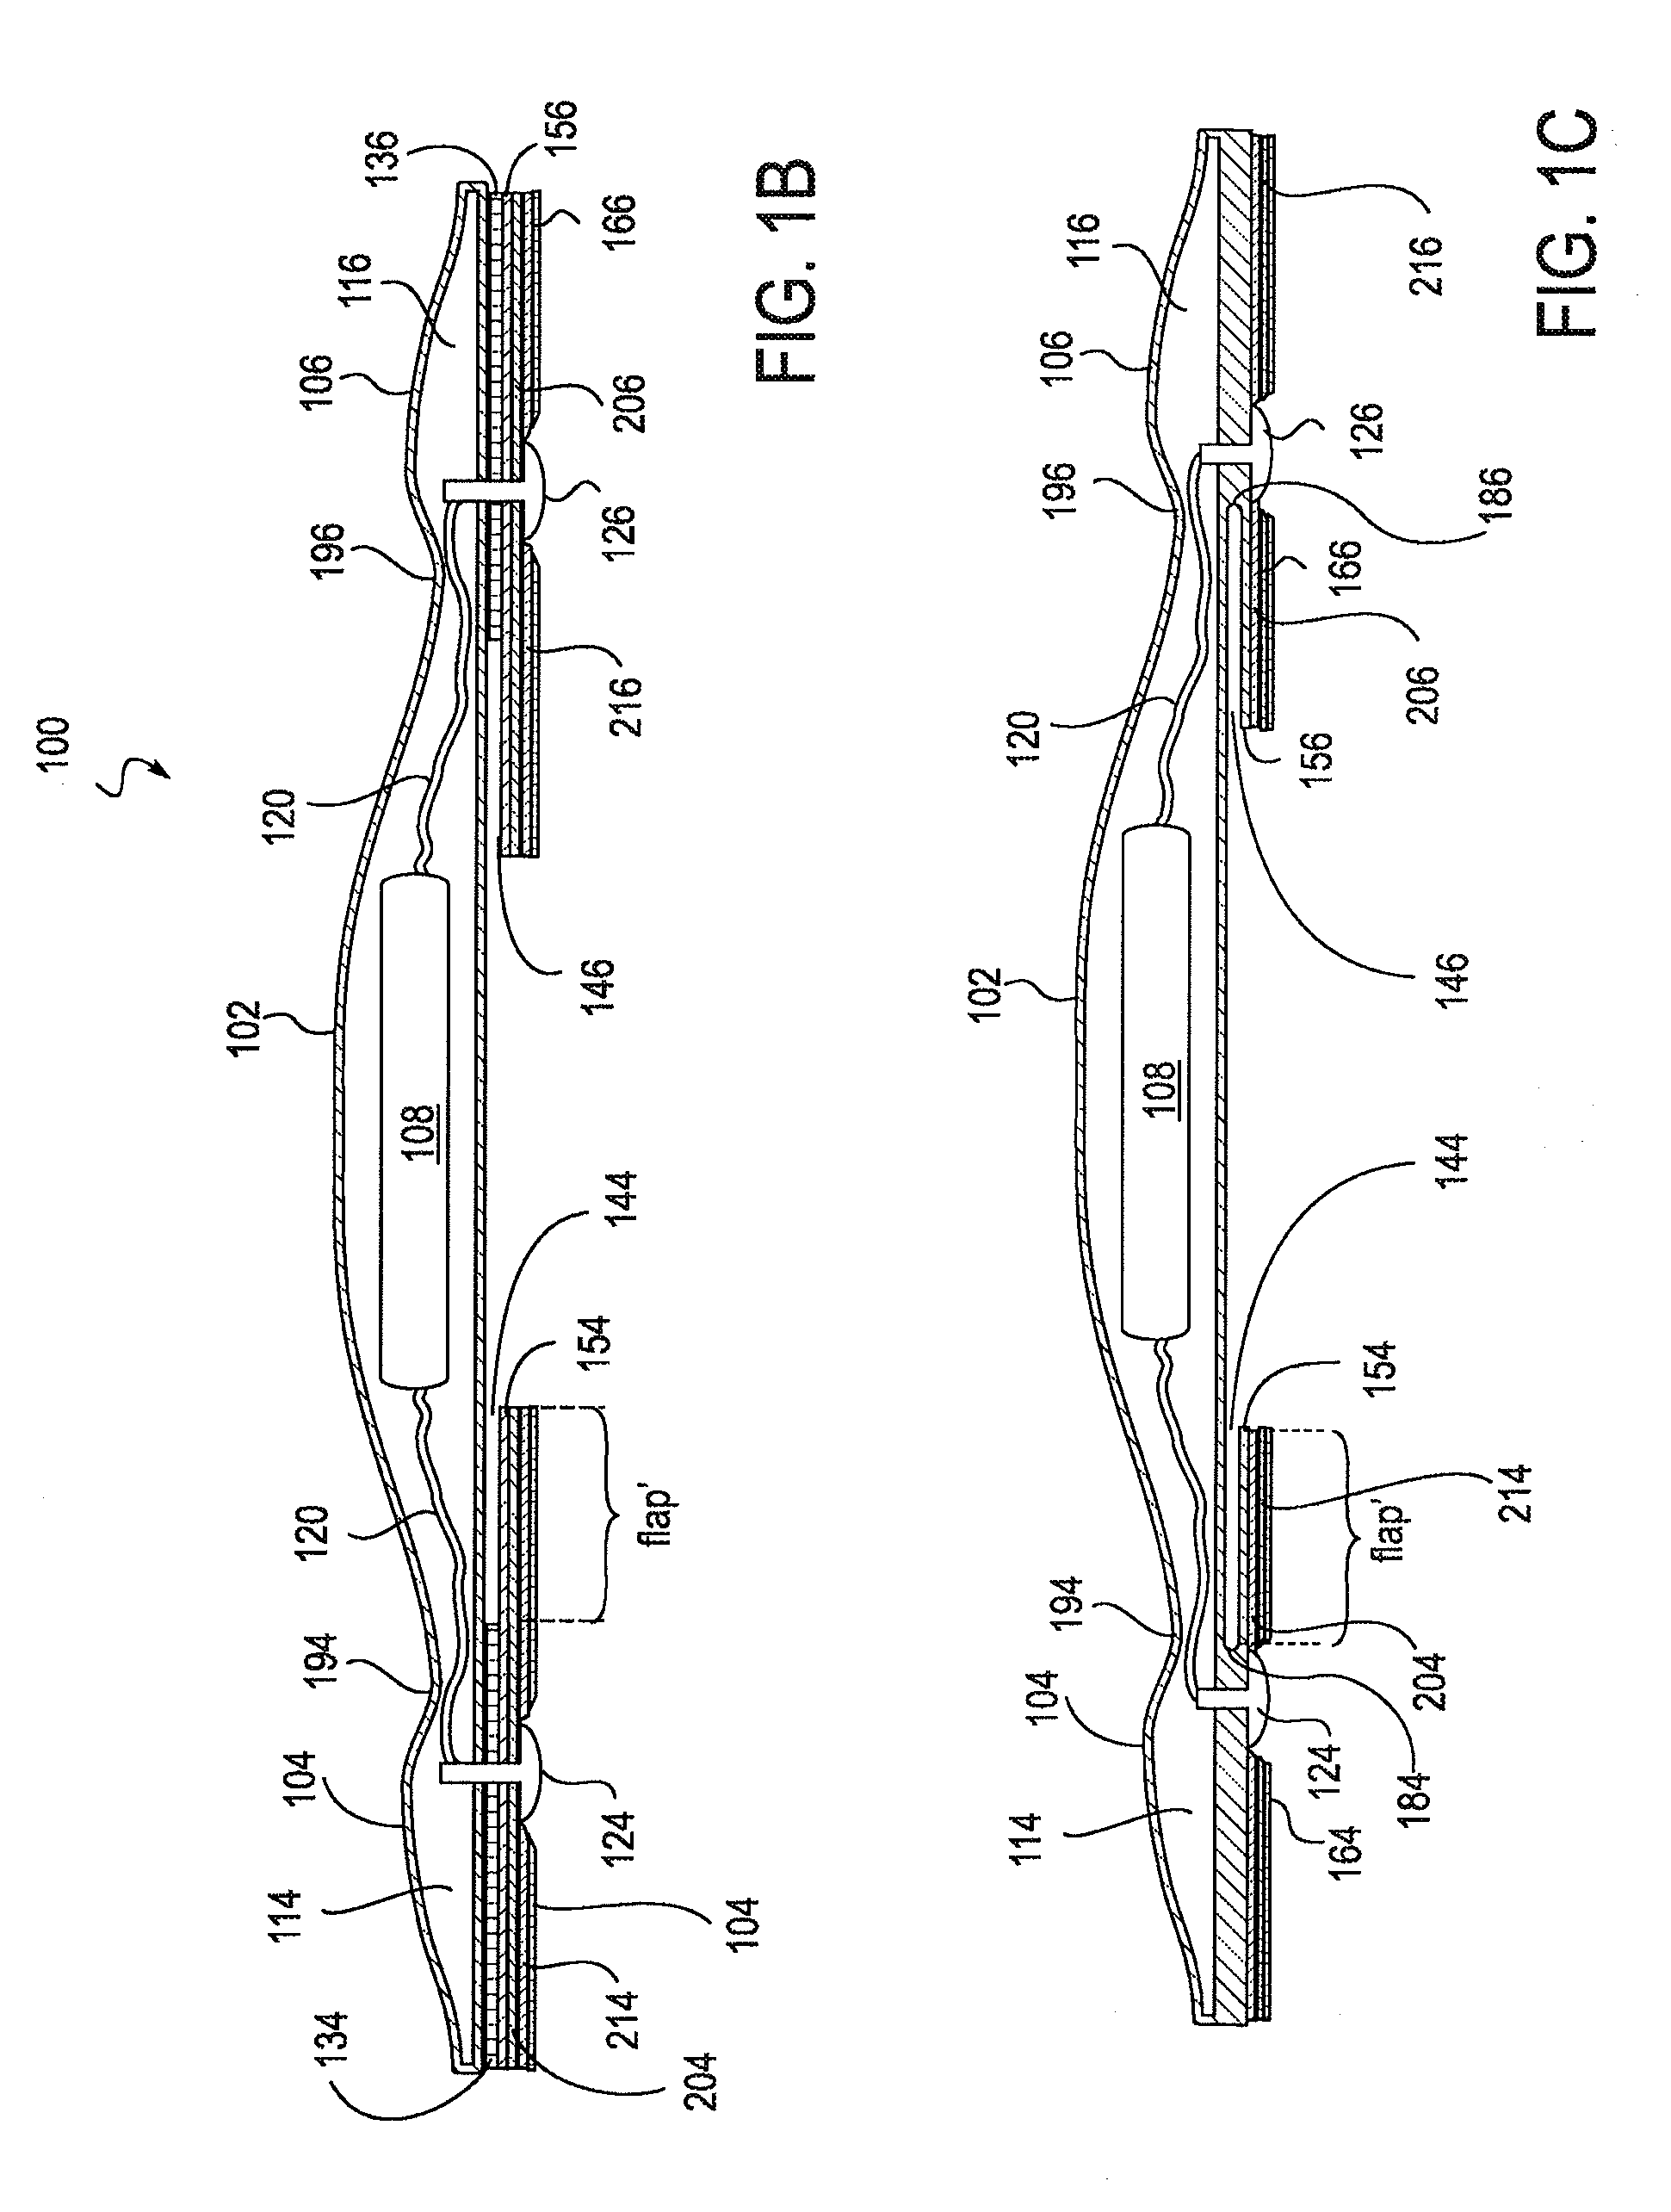 Device features and design elements for long-term adhesion